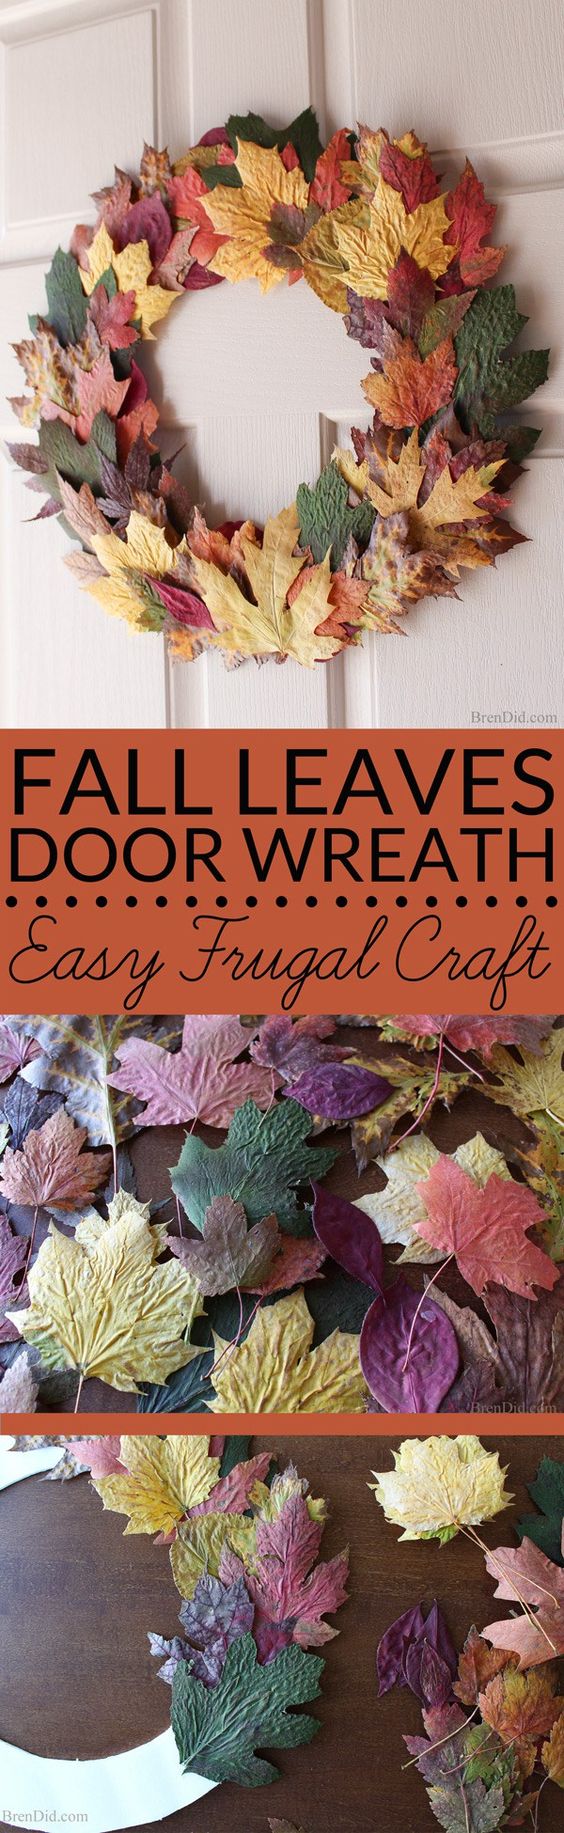 fall-leaves-crafts2